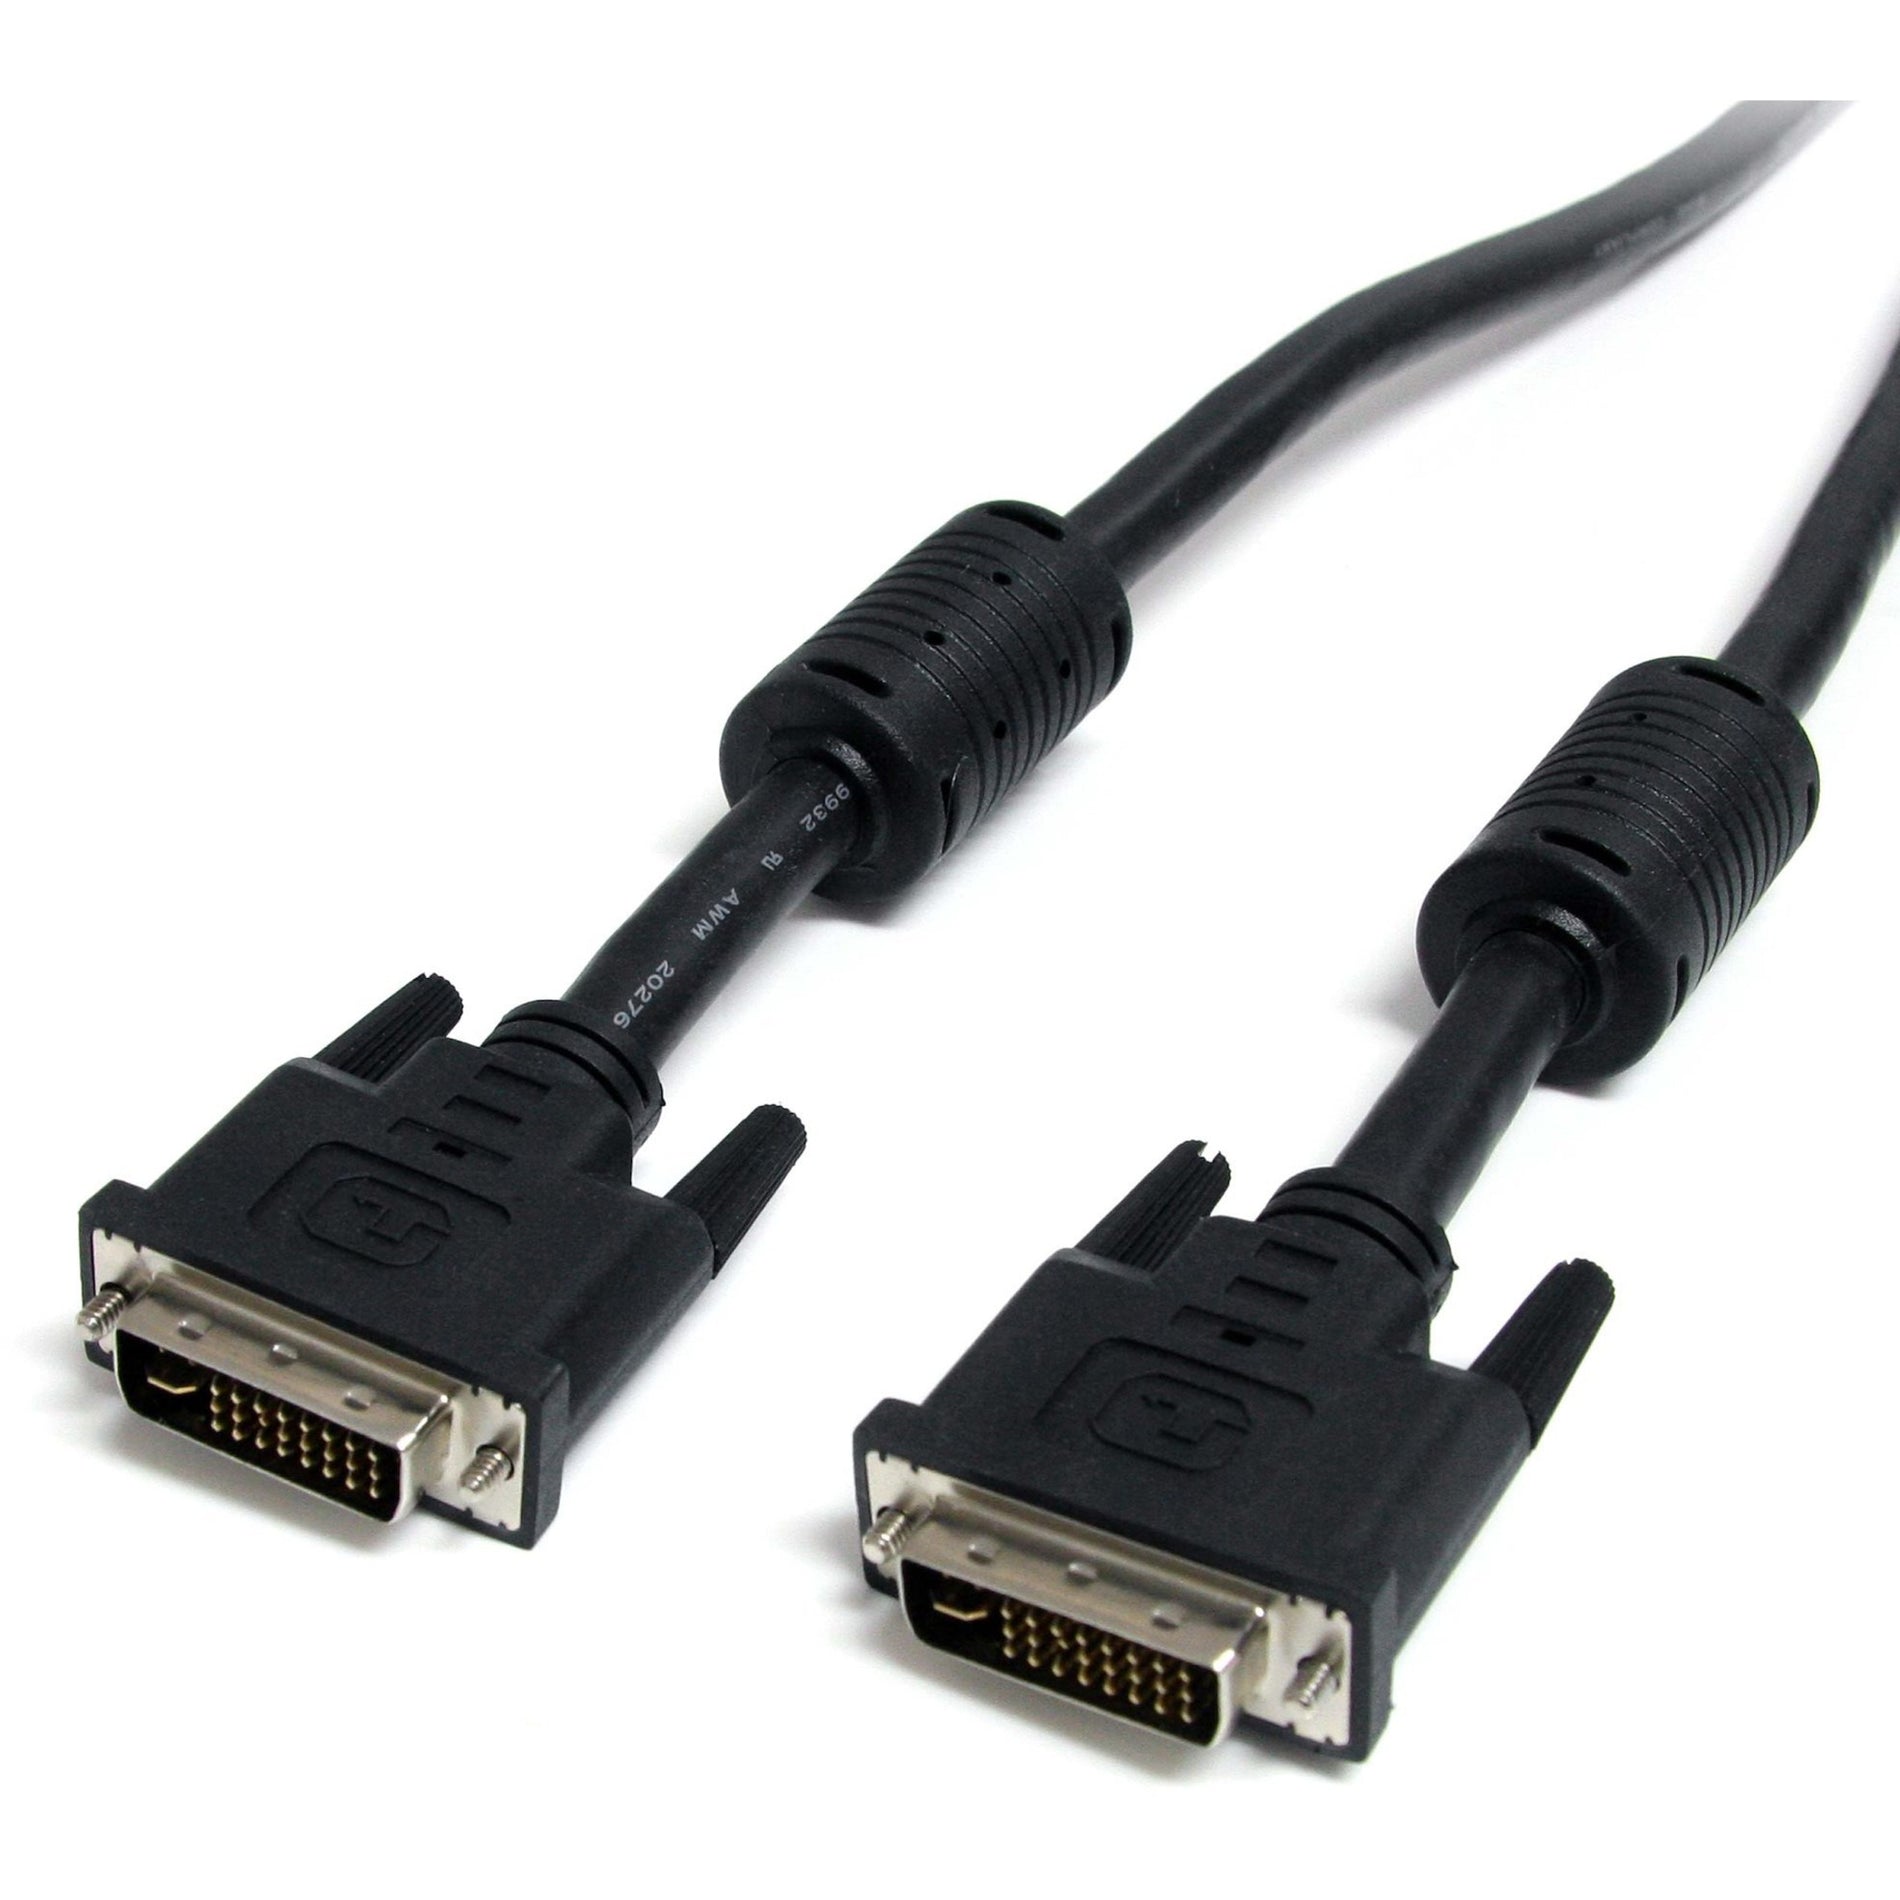 StarTech.com DVIIDMM6 6ft DVI-I Dual Link Monitor Cable - M/M, EMI Protection, 9.9 Gbit/s Data Transfer Rate, 2560 x 1600 Supported Resolution